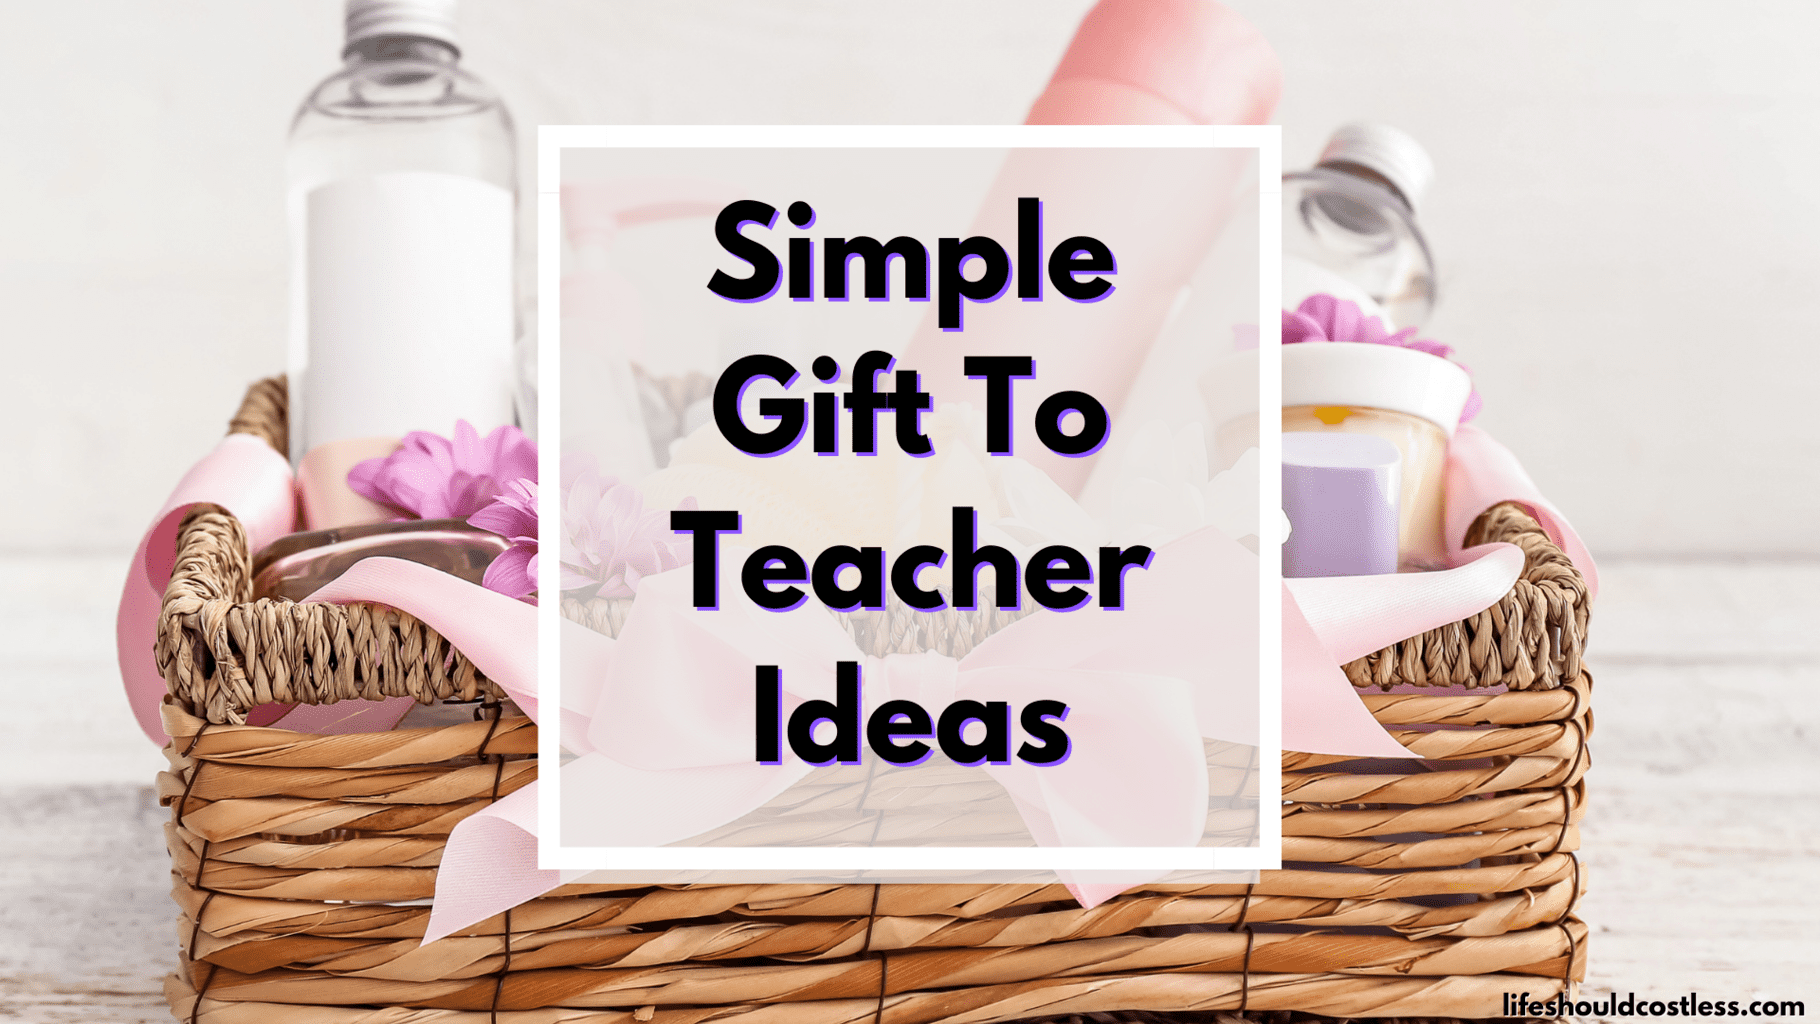 https://lifeshouldcostless.com/wp-content/uploads/2023/03/Gift-To-Teacher-Ideas.png